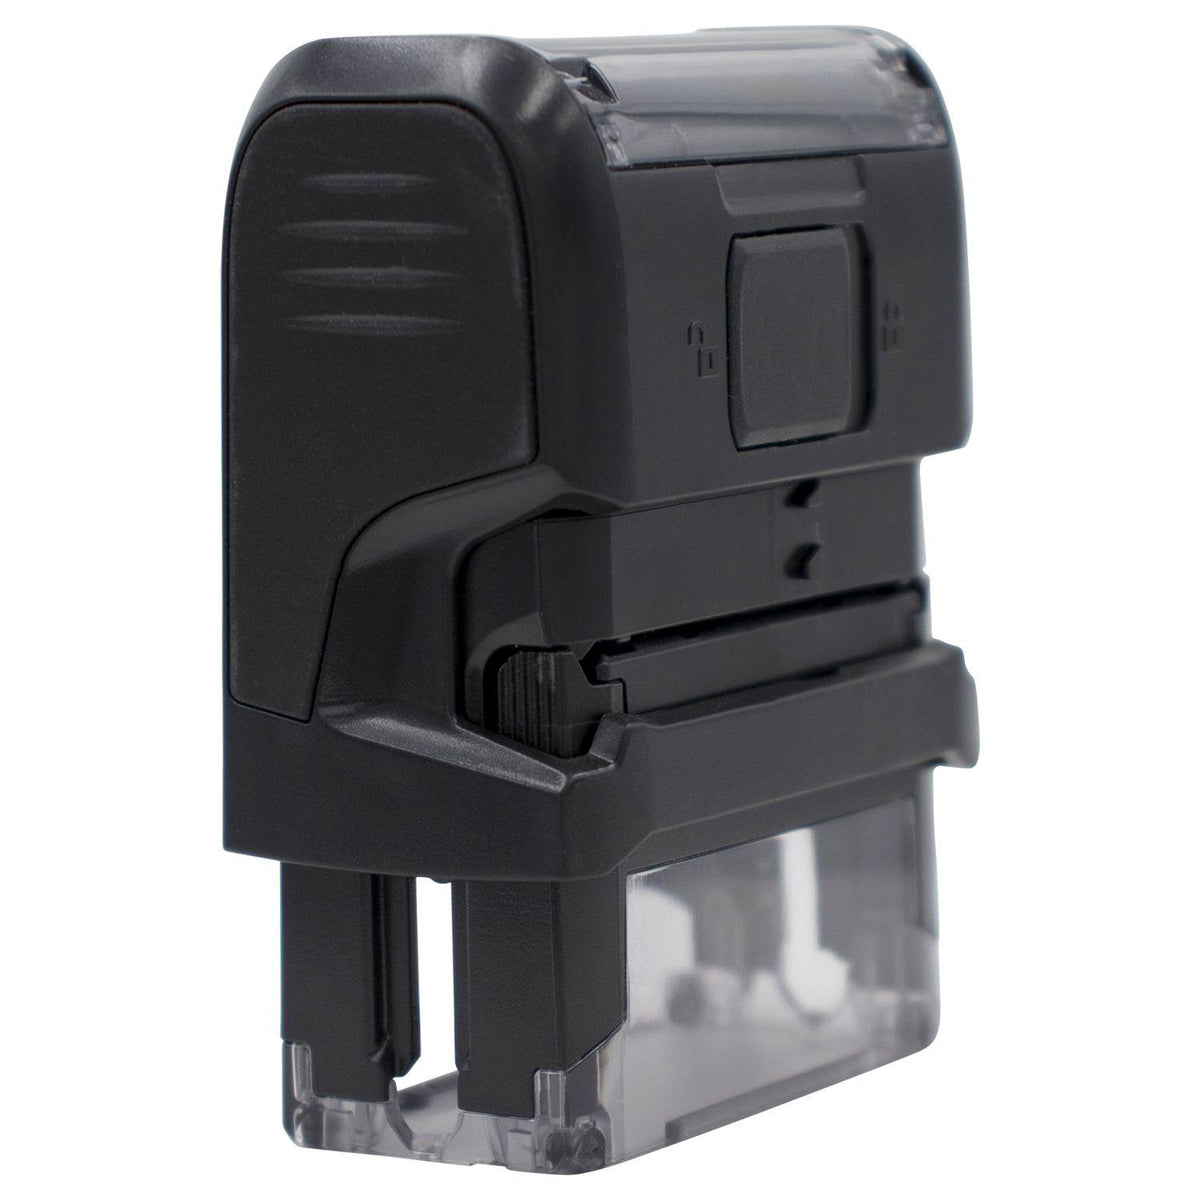 Self-Inking Faxed with Round Date Box Stamp - Engineer Seal Stamps - Brand_Trodat, Impression Size_Small, Stamp Type_Self-Inking Stamp, Type of Use_Business, Type of Use_Office, Type of Use_Professional